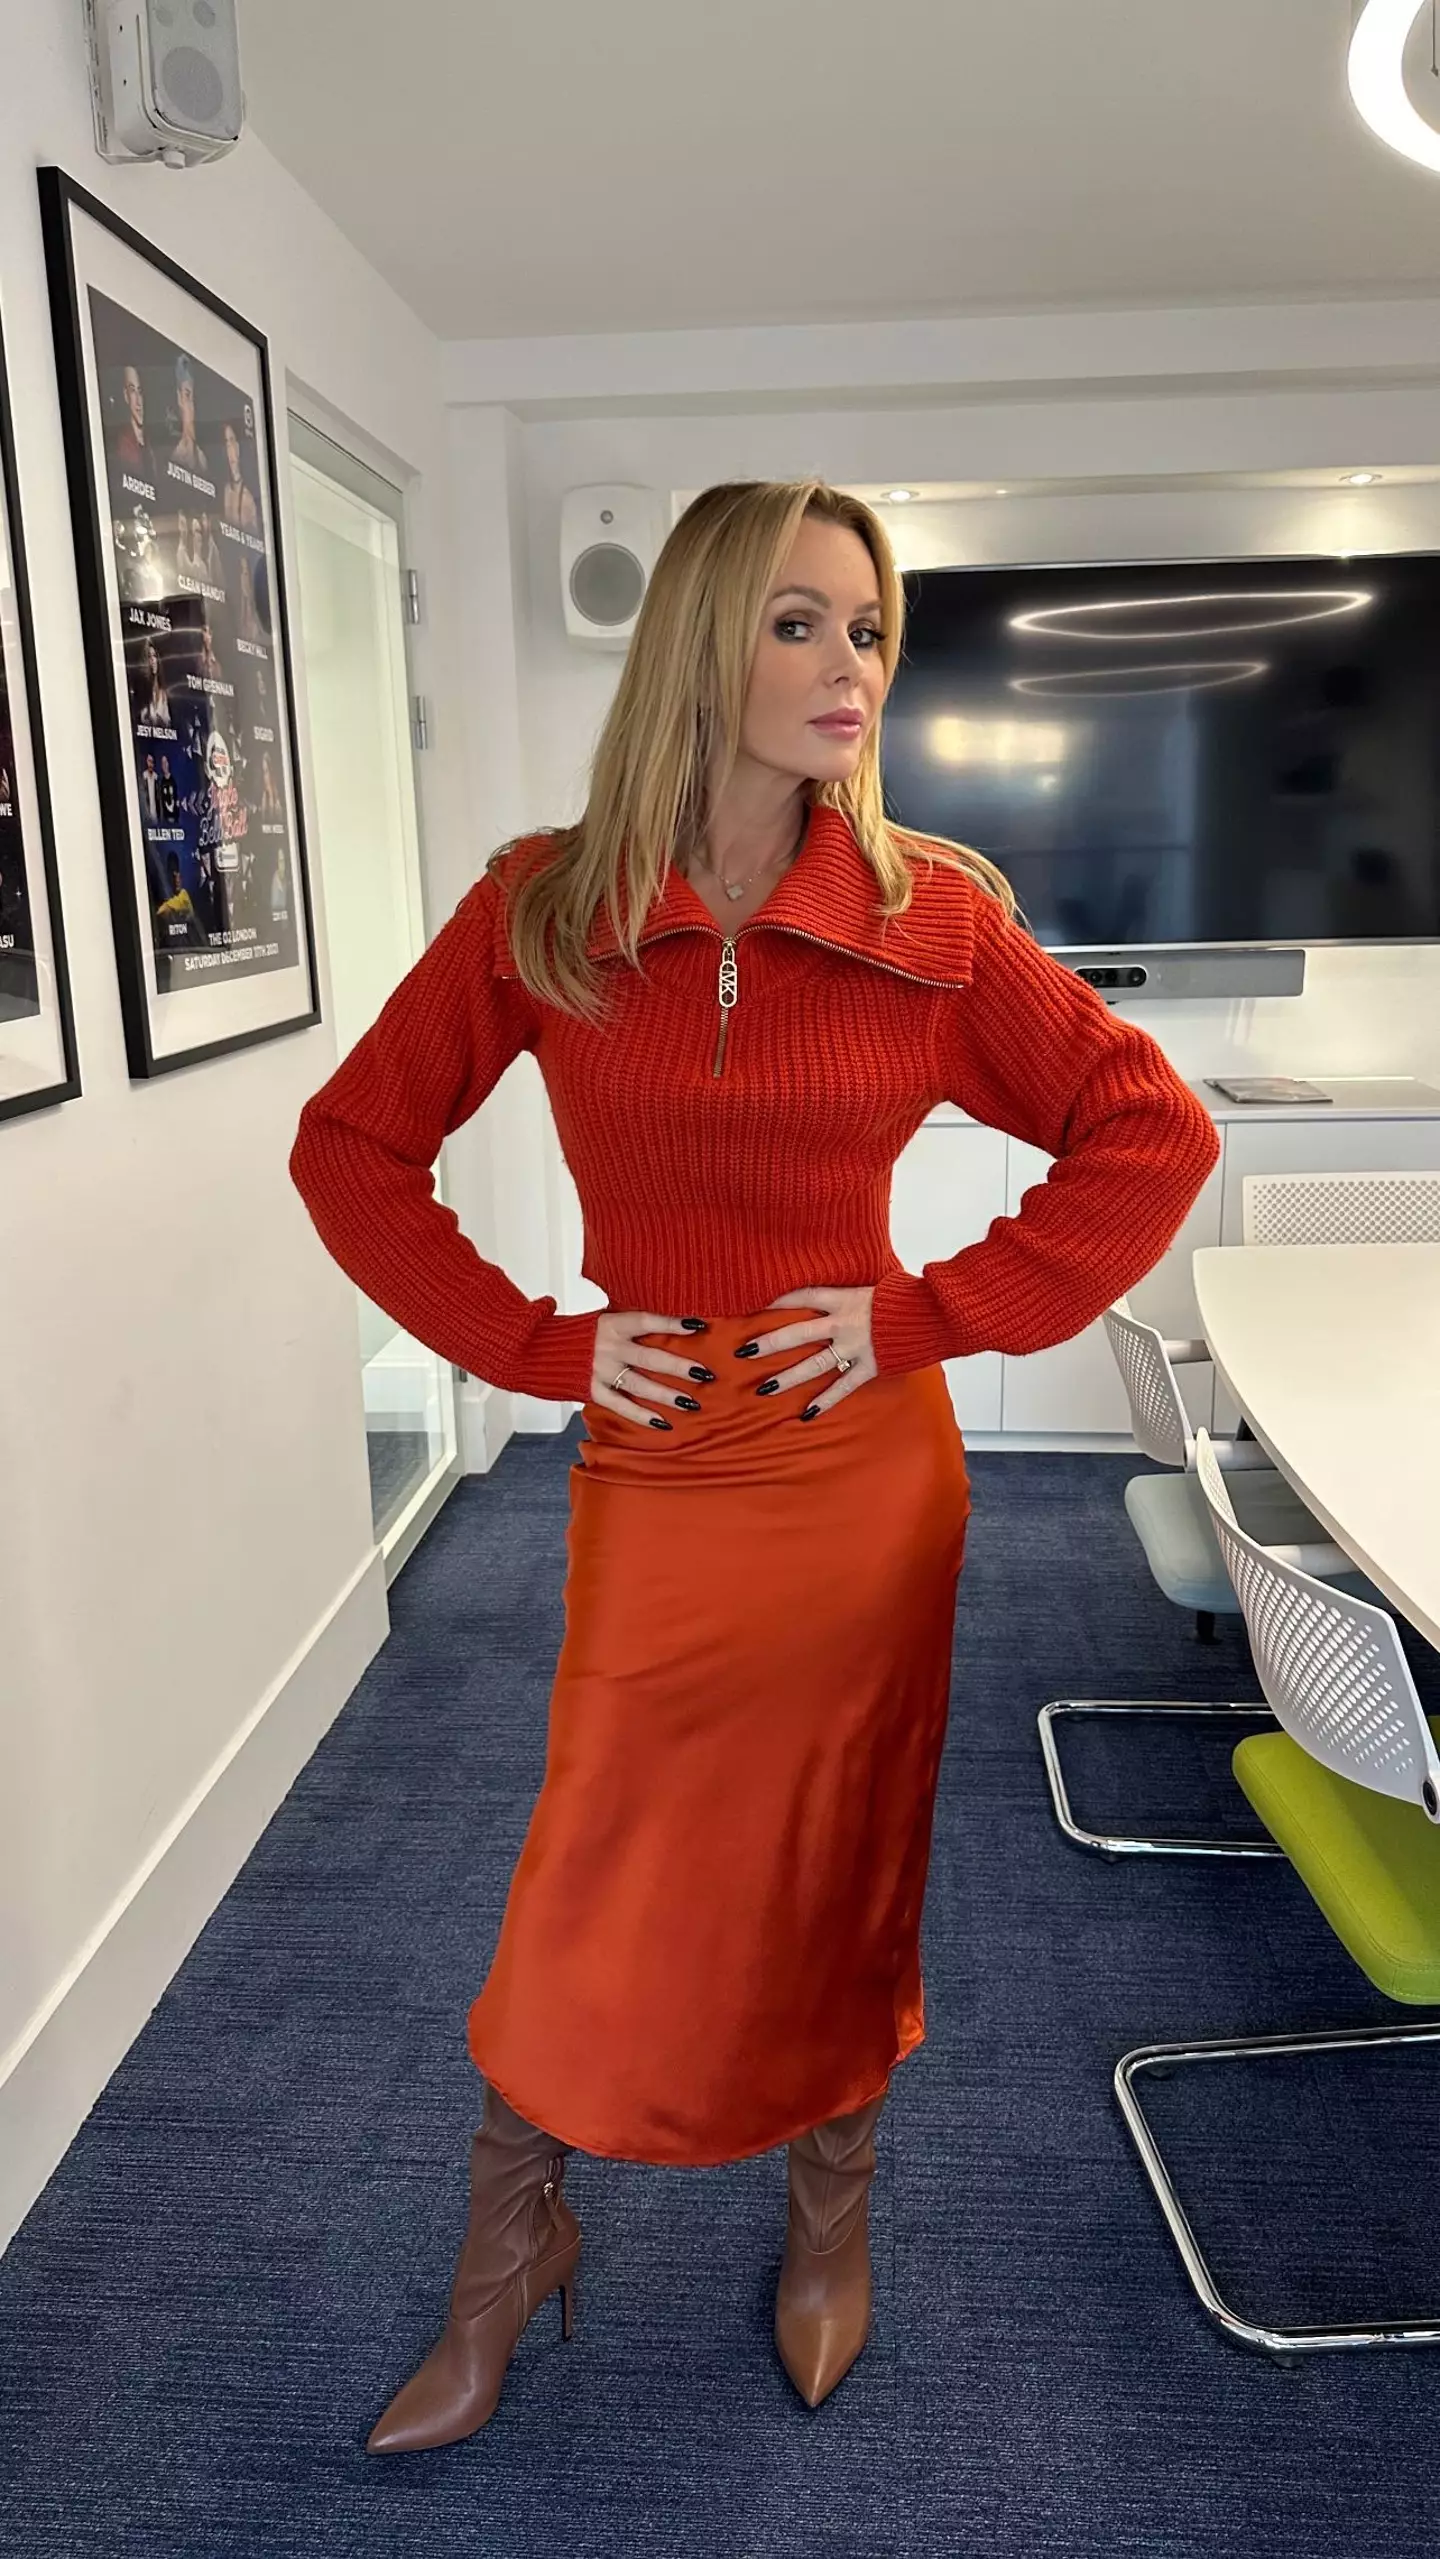 Amanda Holden accidentally flashed her two million Instagram followers.